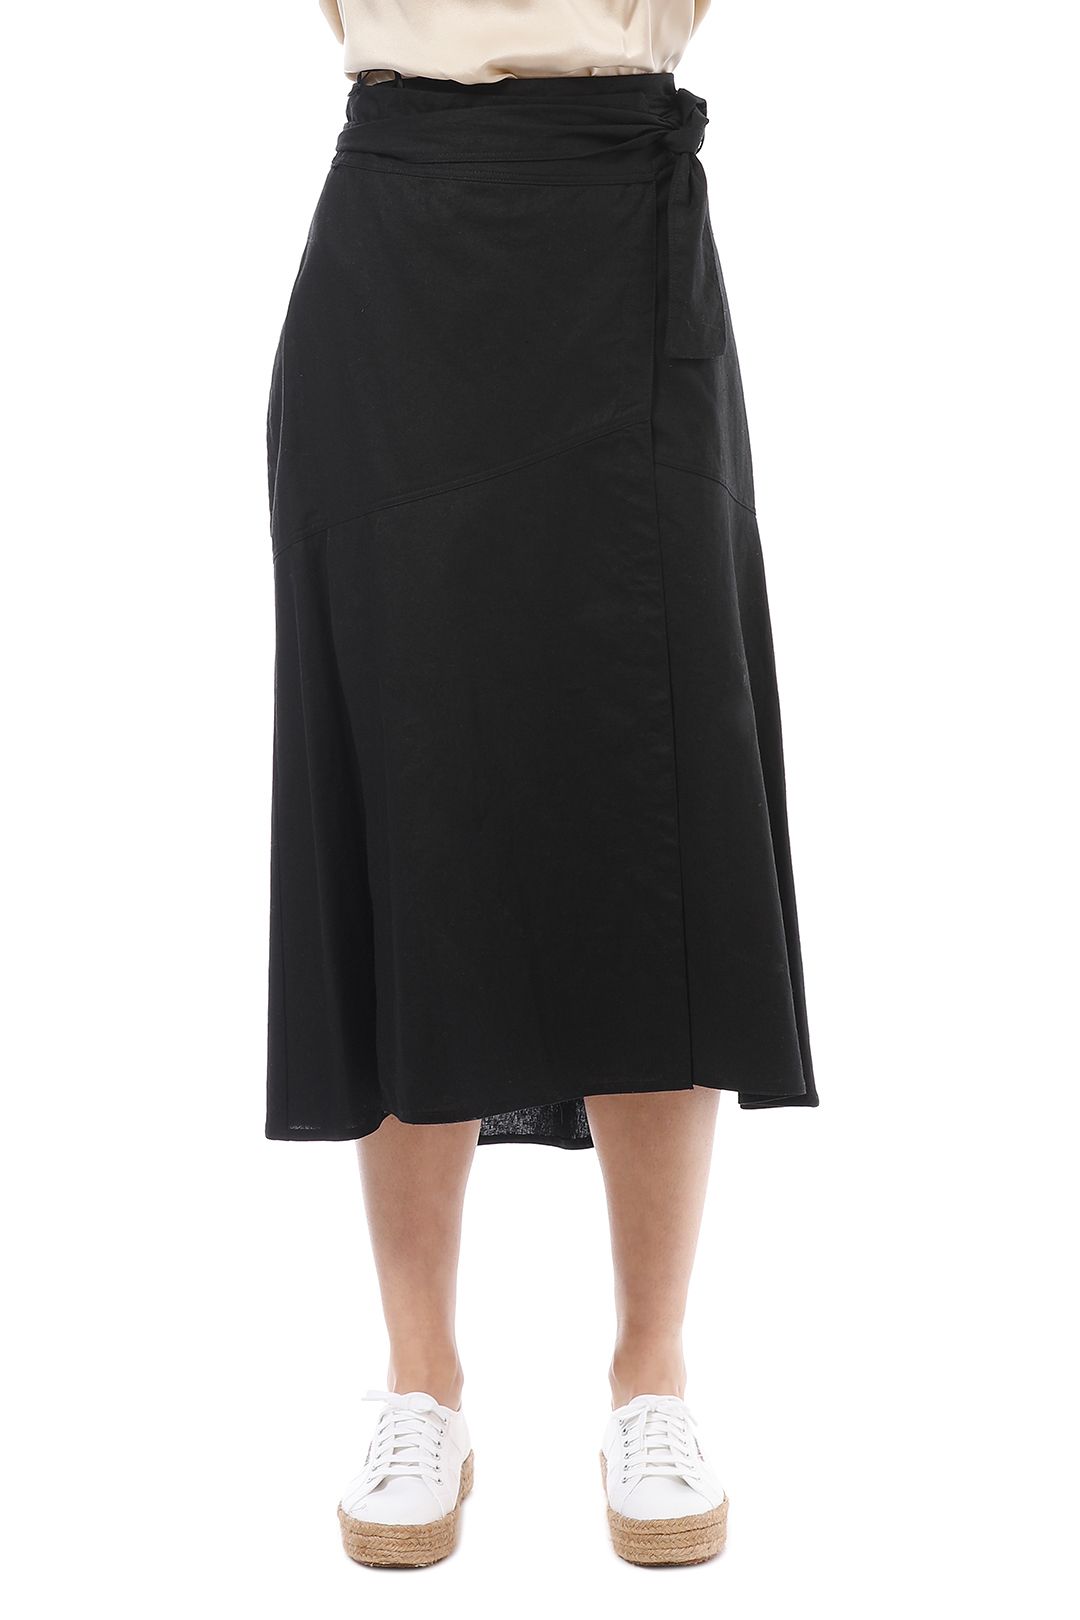 AKIN by Ginger and Smart - Grace Wrap Skirt - Black - Front Detail